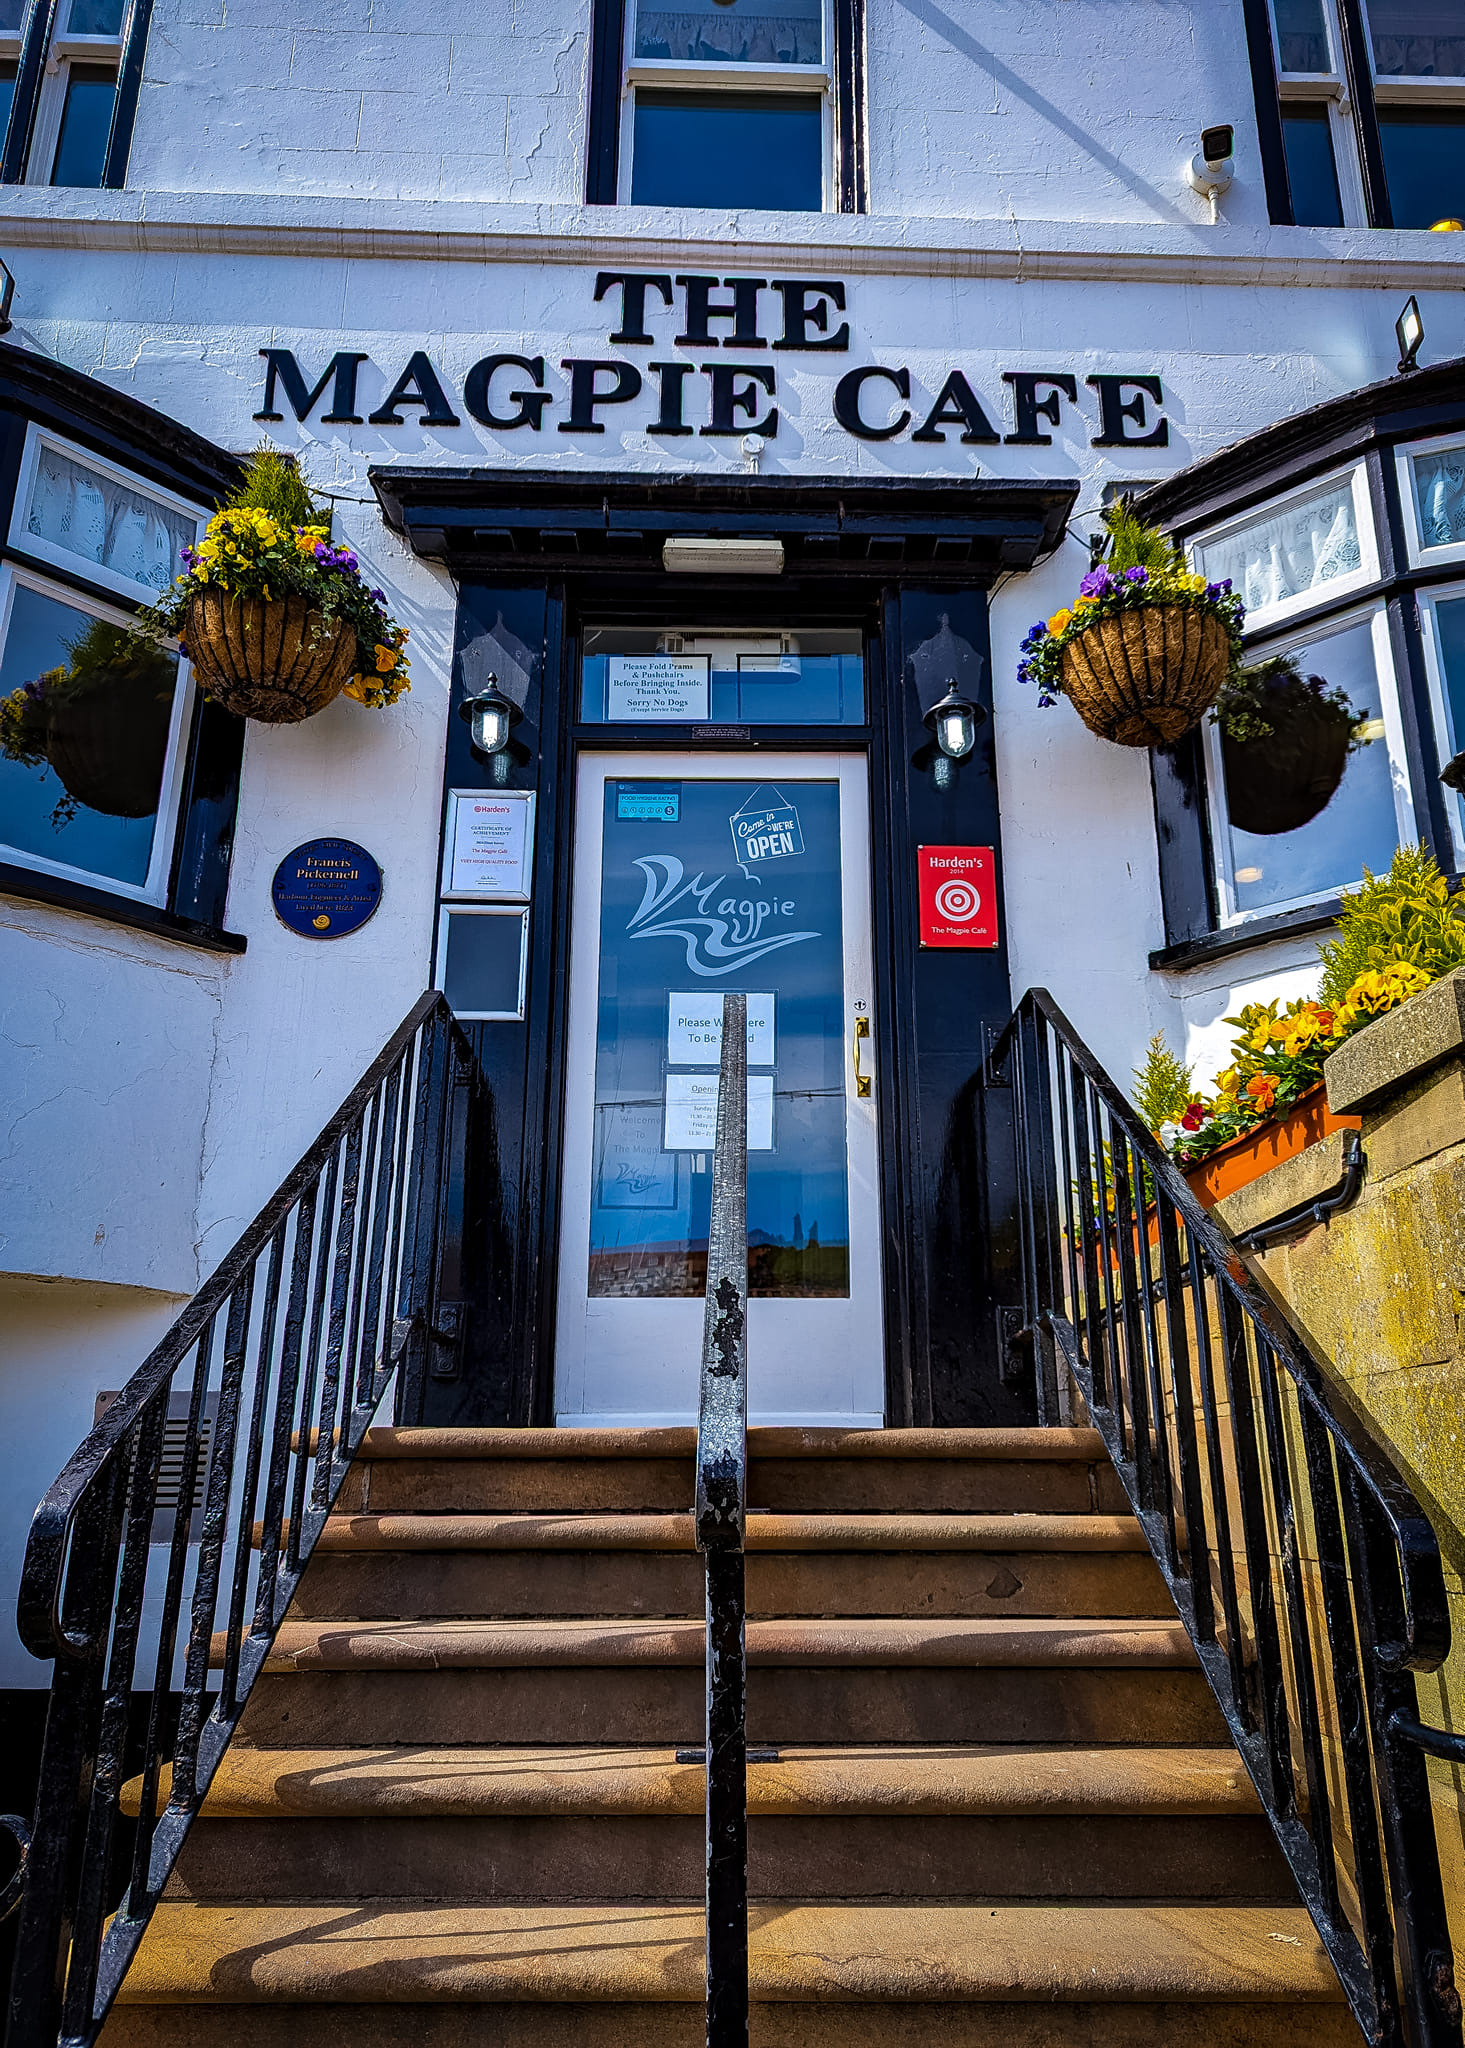 The Magpie Cafe is a institution in Whitby and a must visit for a chippy tea